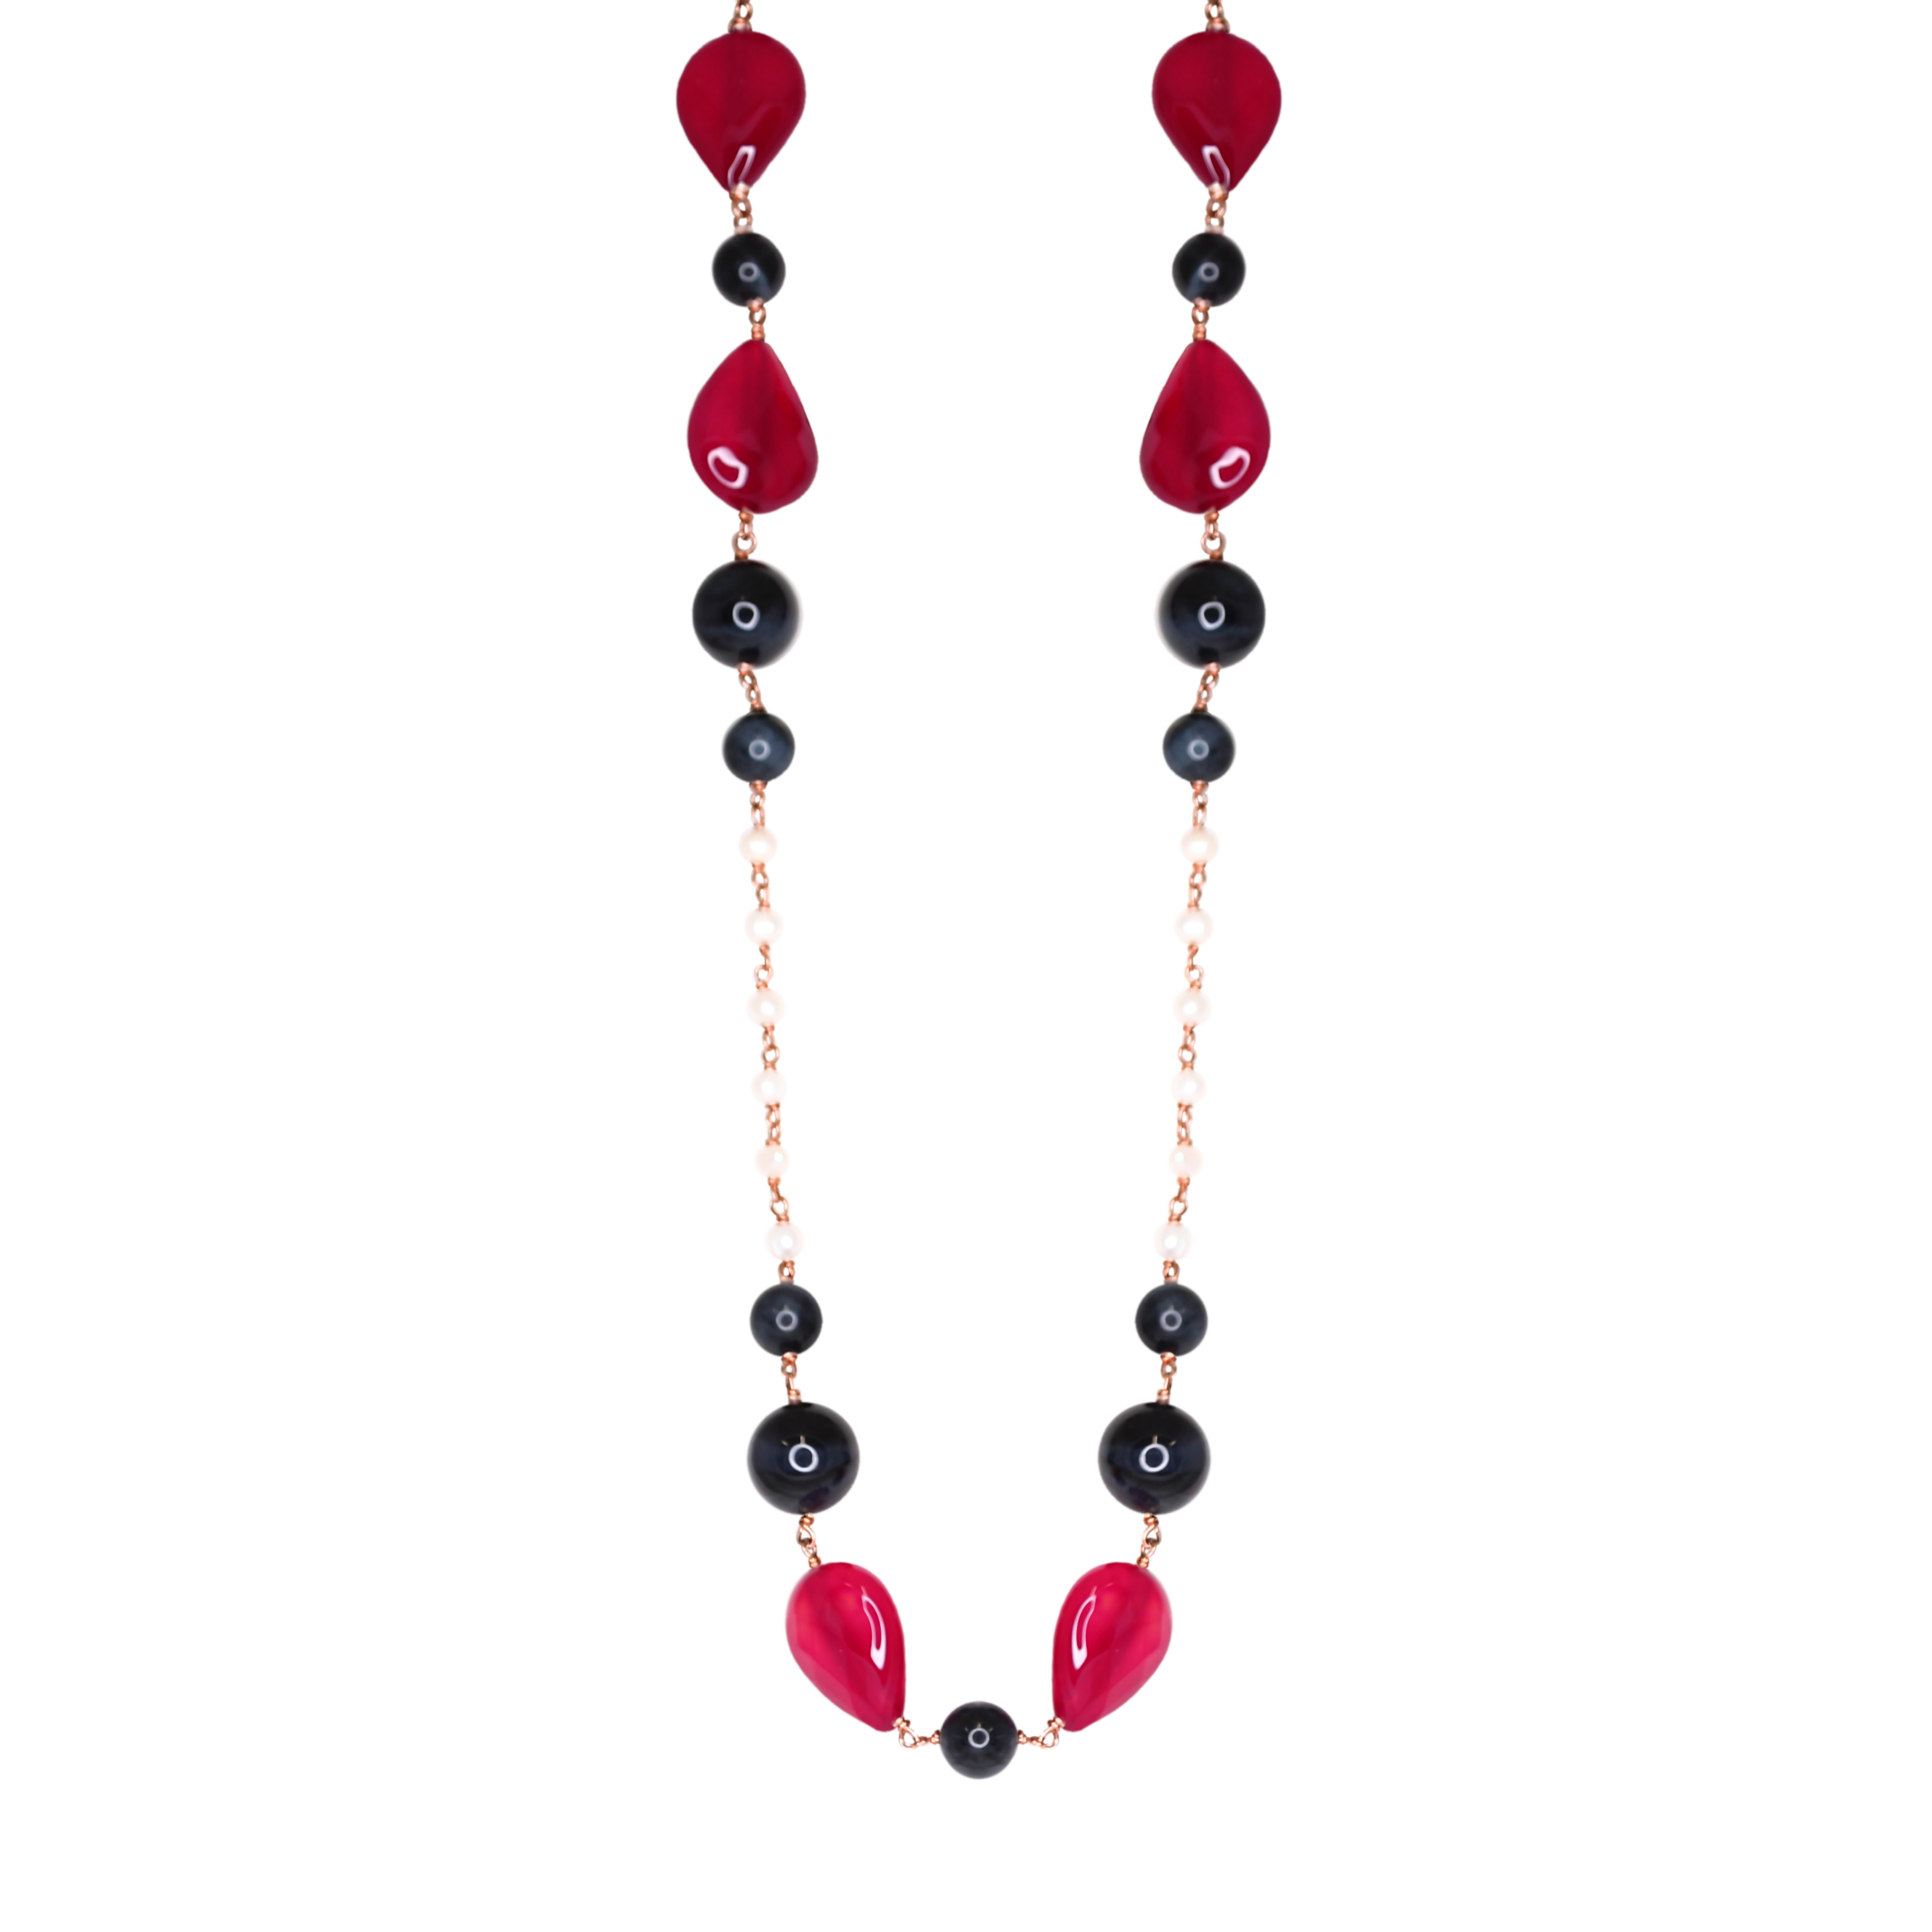 Ruby Agate, Pearl & Onyx Necklace - 120cm